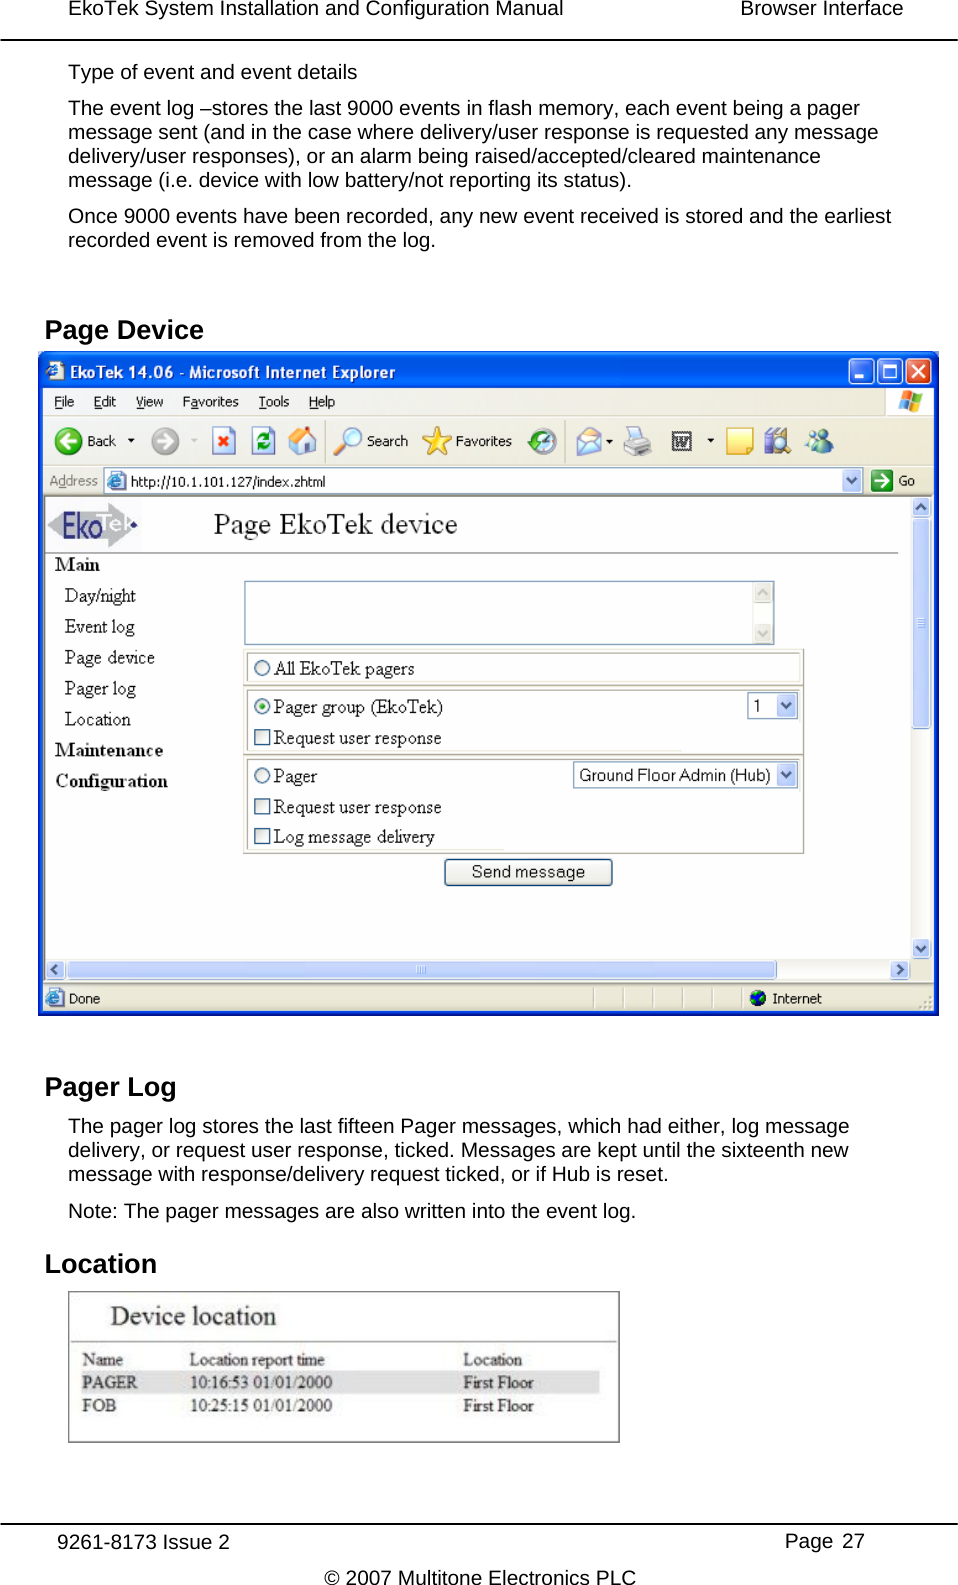 EkoTek System Installation and Configuration Manual  Browser Interface  Type of event and event The event log –stores the details last 9000 events in flash memory, each event being a pager here delivery/user response is requested any message arliest Page Device Pager Log ores the last fifteen Pager messages, which had either, log message elivery, or request user response, ticked. Messages are kept until the sixteenth new e with response/delivery request ticked, or if Hub is reset. ger messages are also written into the event log. Lomessage sent (and in the case wdelivery/user responses), or an alarm being raised/accepted/cleared maintenance message (i.e. device with low battery/not reporting its status). Once 9000 events have been recorded, any new event received is stored and the erecorded event is removed from the log.   The pager log stdmessagNote: The pacation   9261-8173 Issue 2     Page 27 © 2007 Multitone Electronics PLC 